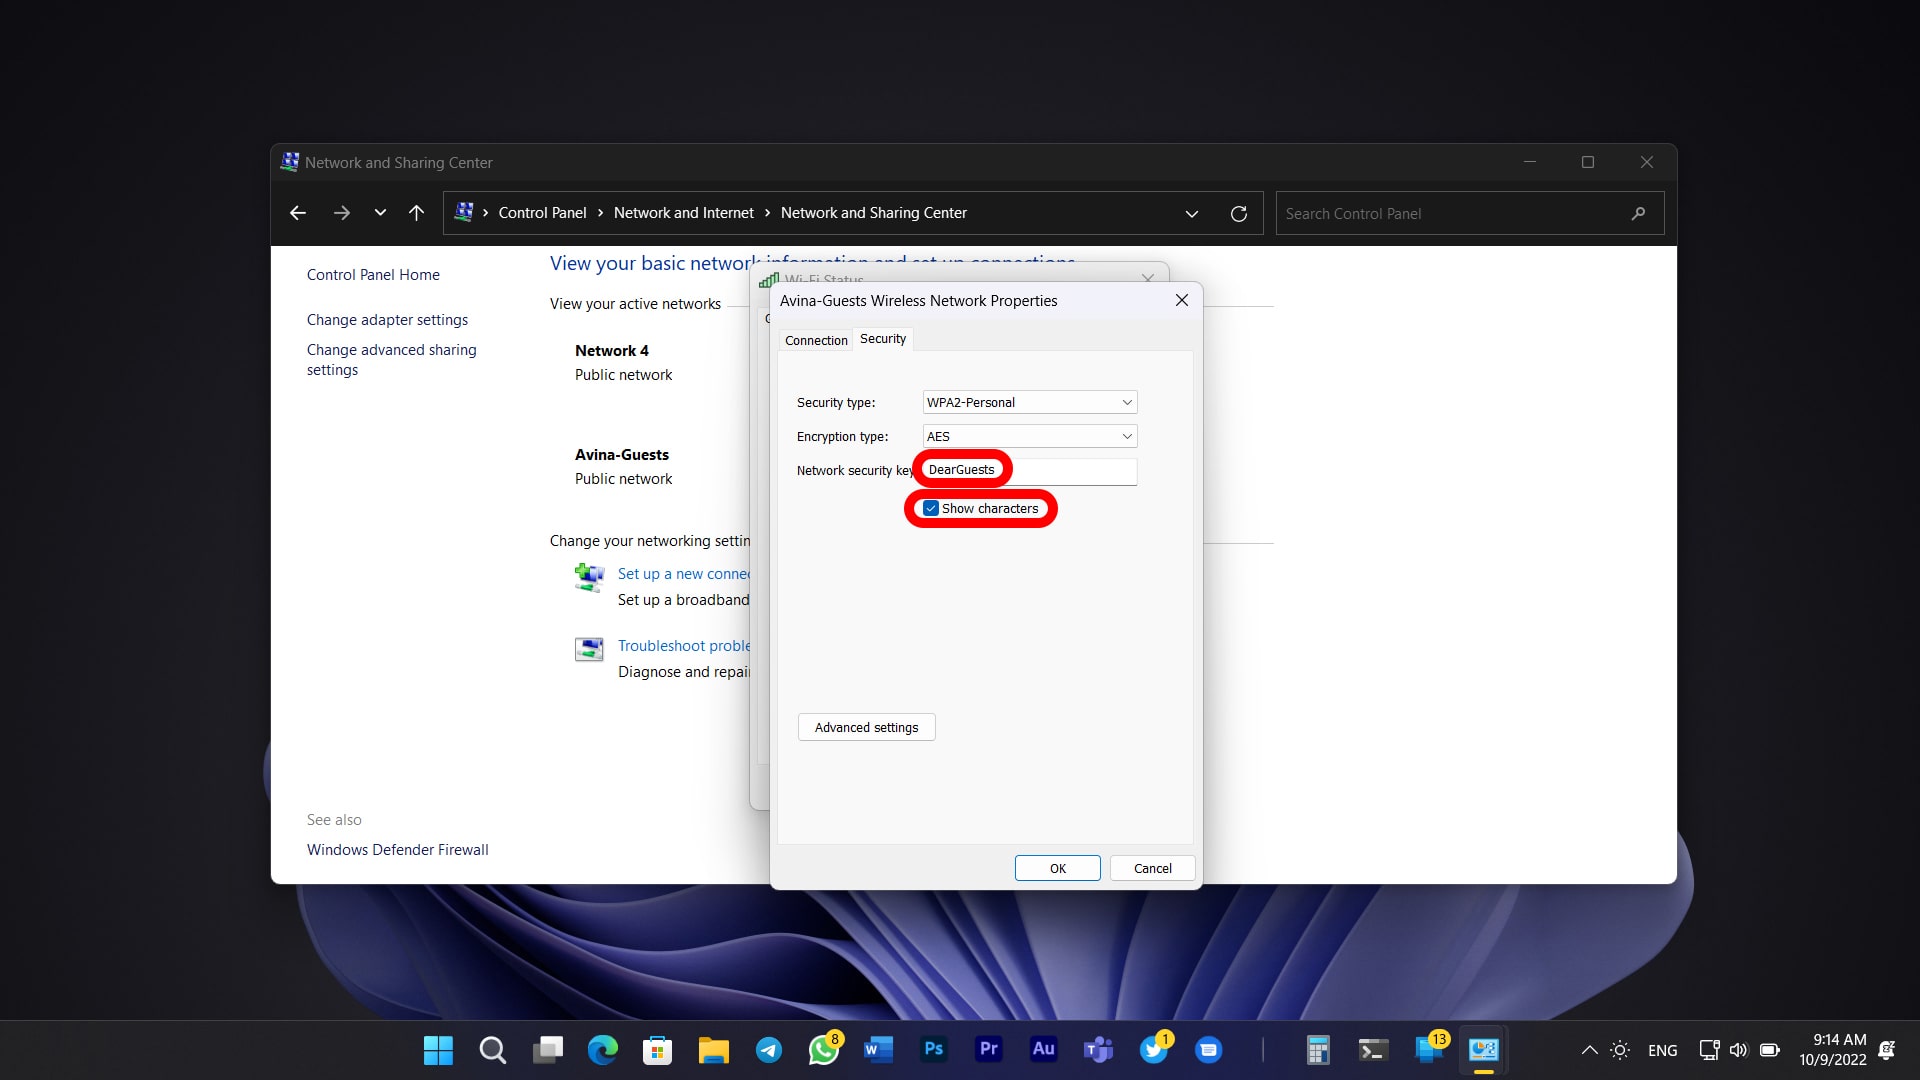 The seventh step is how to view the Wi-Fi password stored in Windows